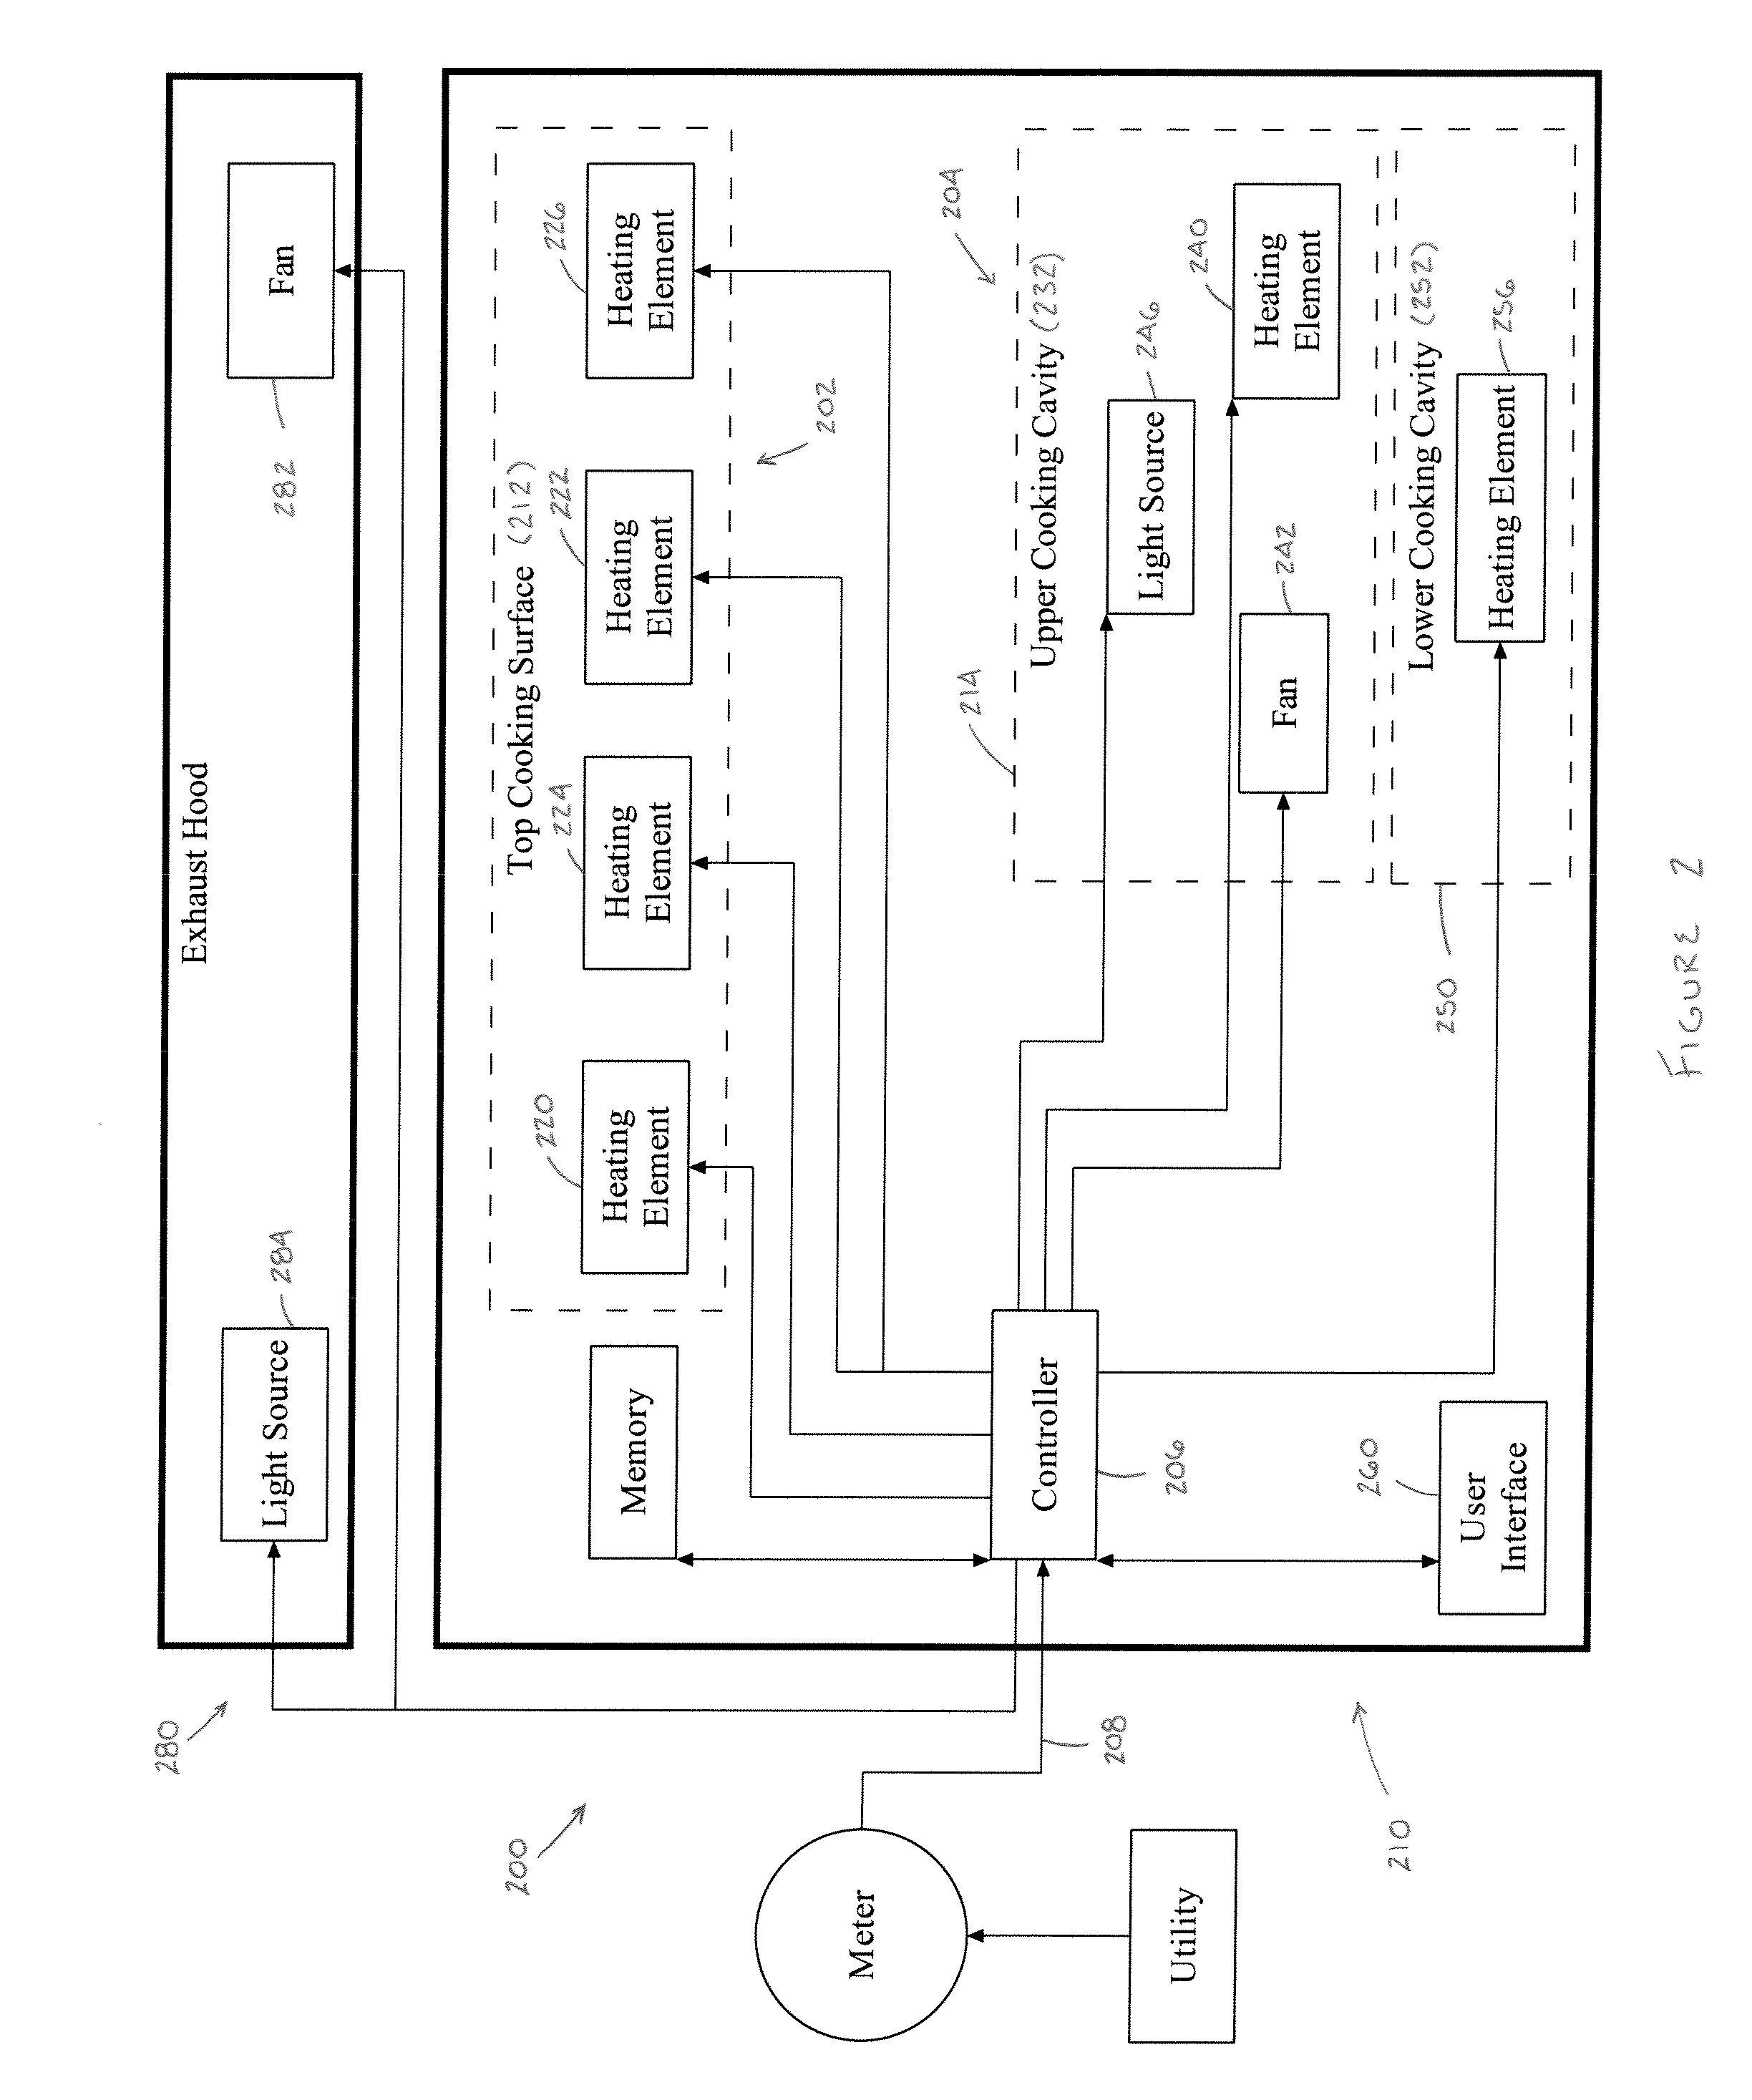 Appliance having a user grace period for reinitiating operating when in demand response energy mode